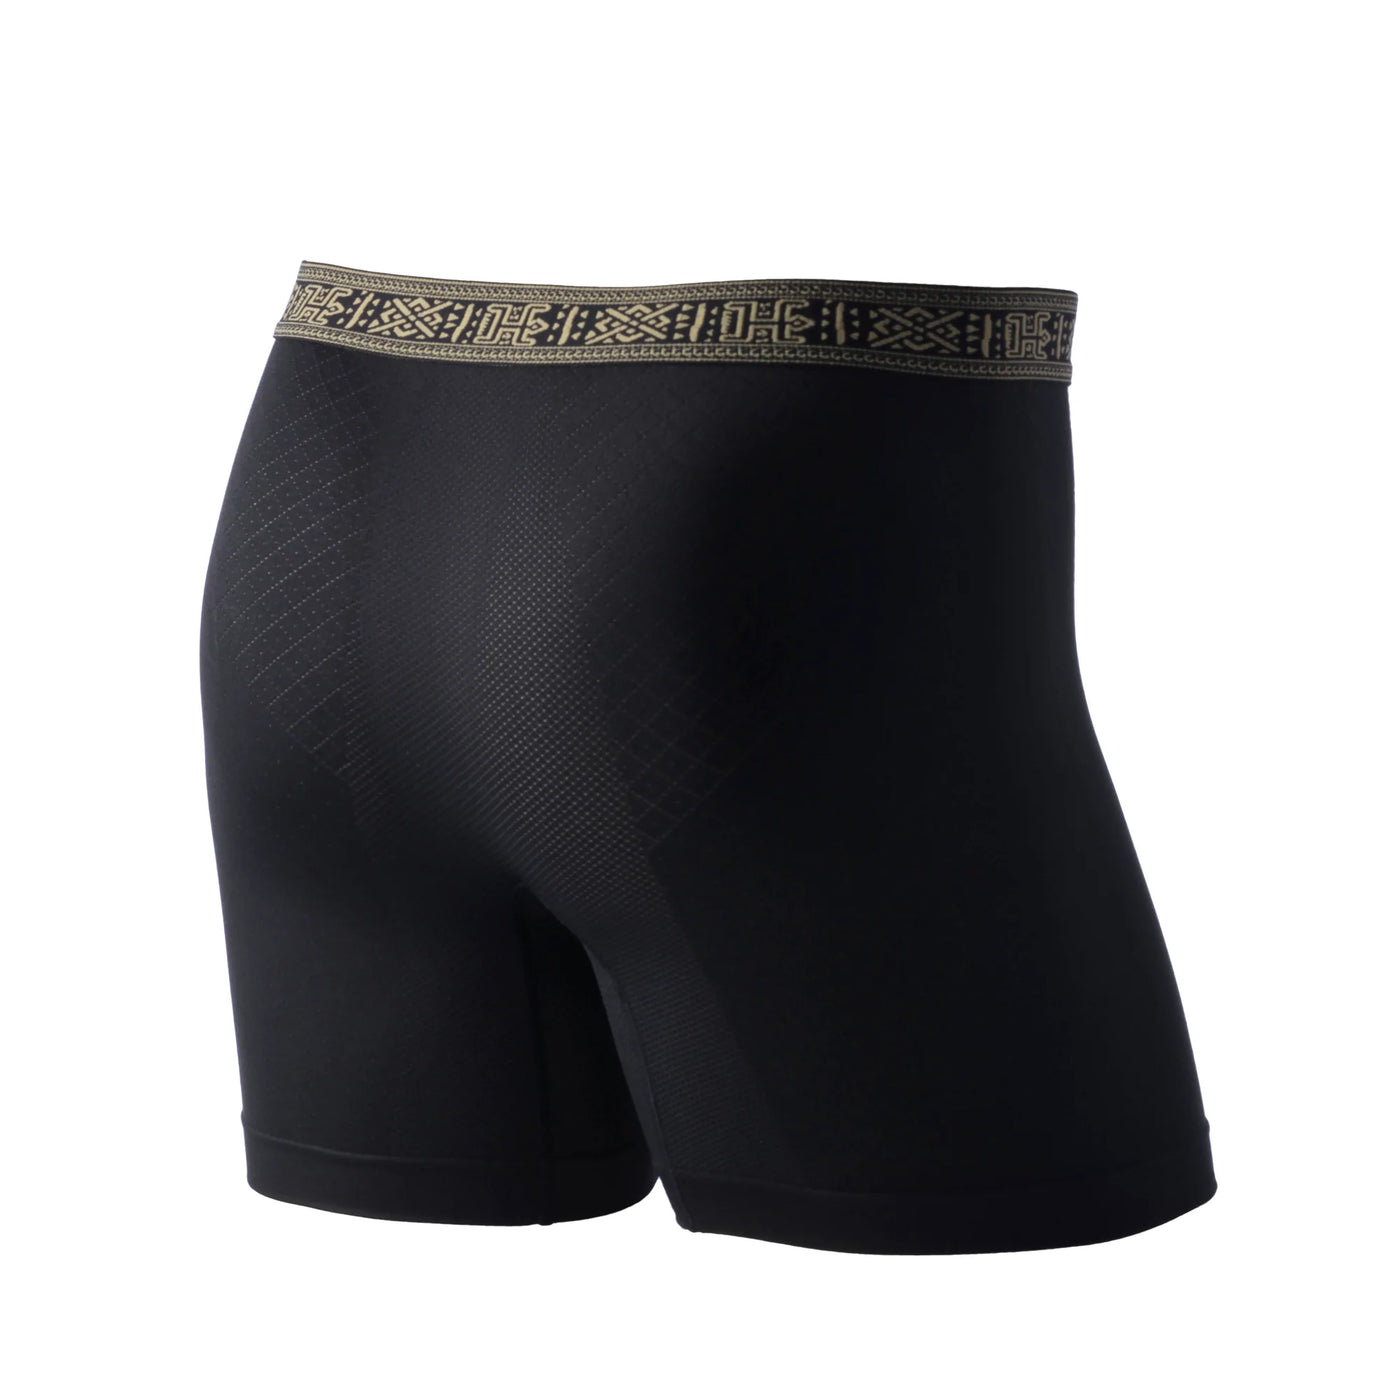 Back view of B\black boxer briefs with embroidered black and gold waistband